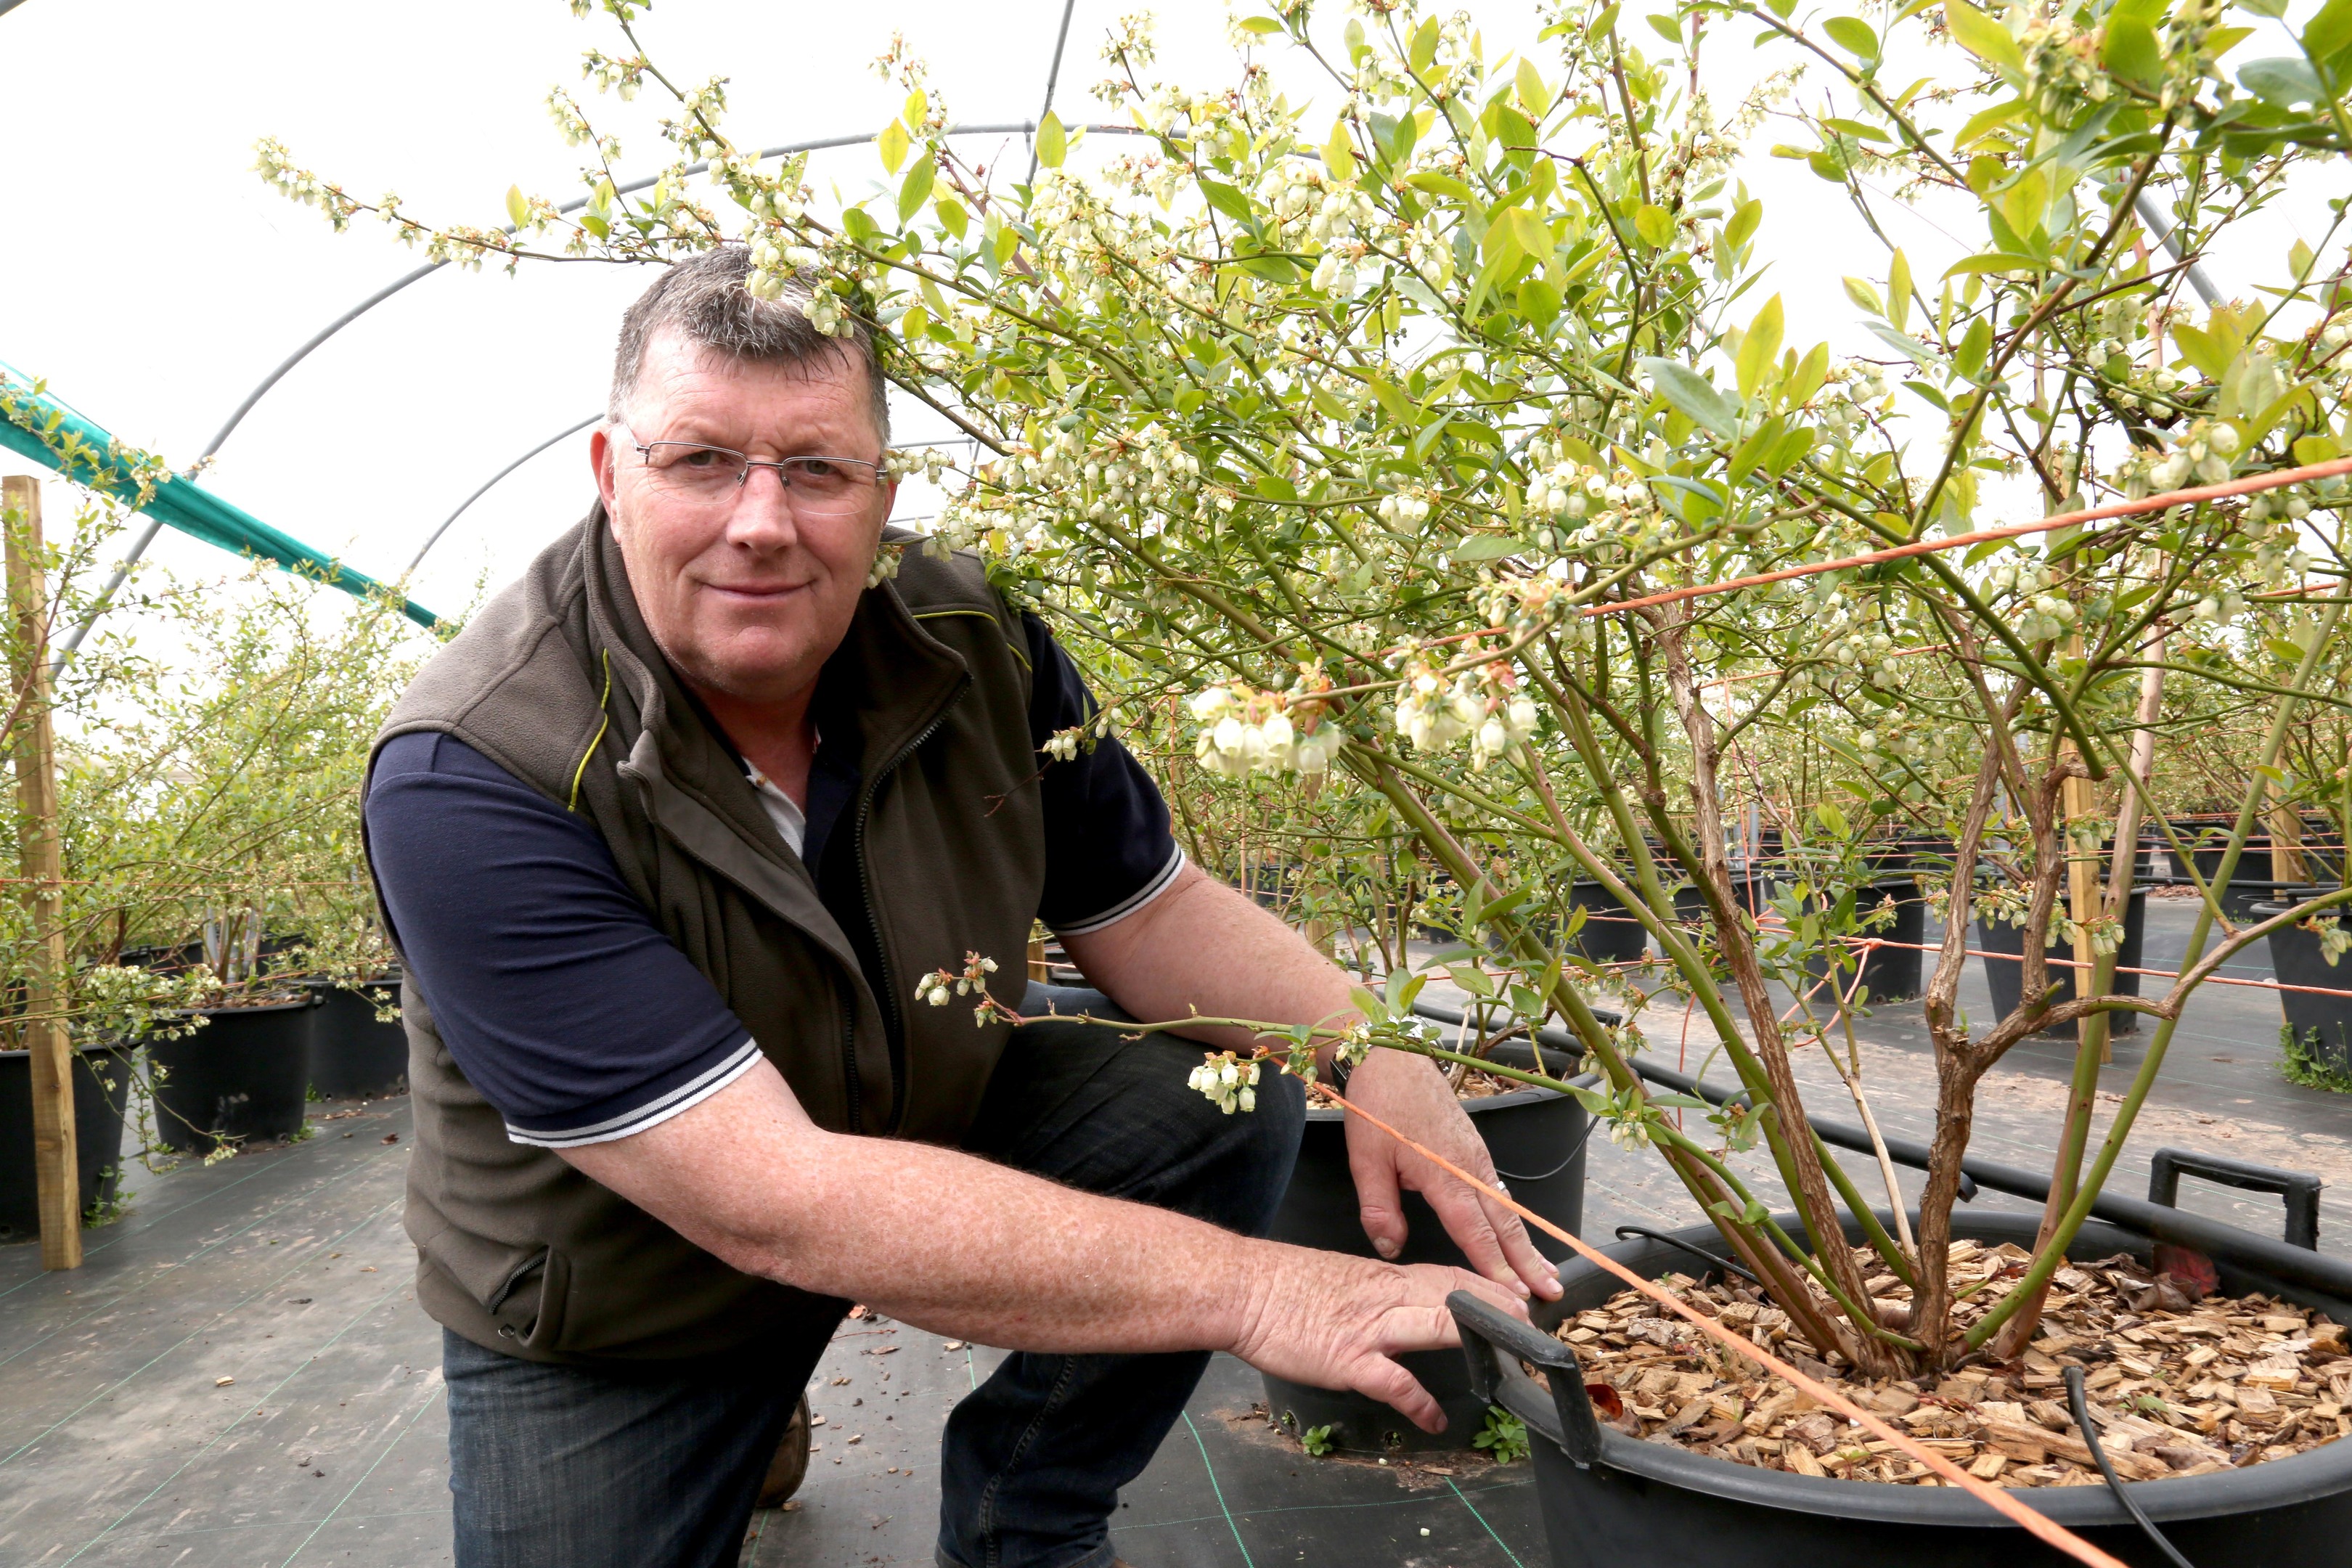 Allen Innes, farm manager at East Seaton farm in Arbroath, has been shortlisted in the Soft Fruit Grower of the Year category at the Horticulture Week awards.